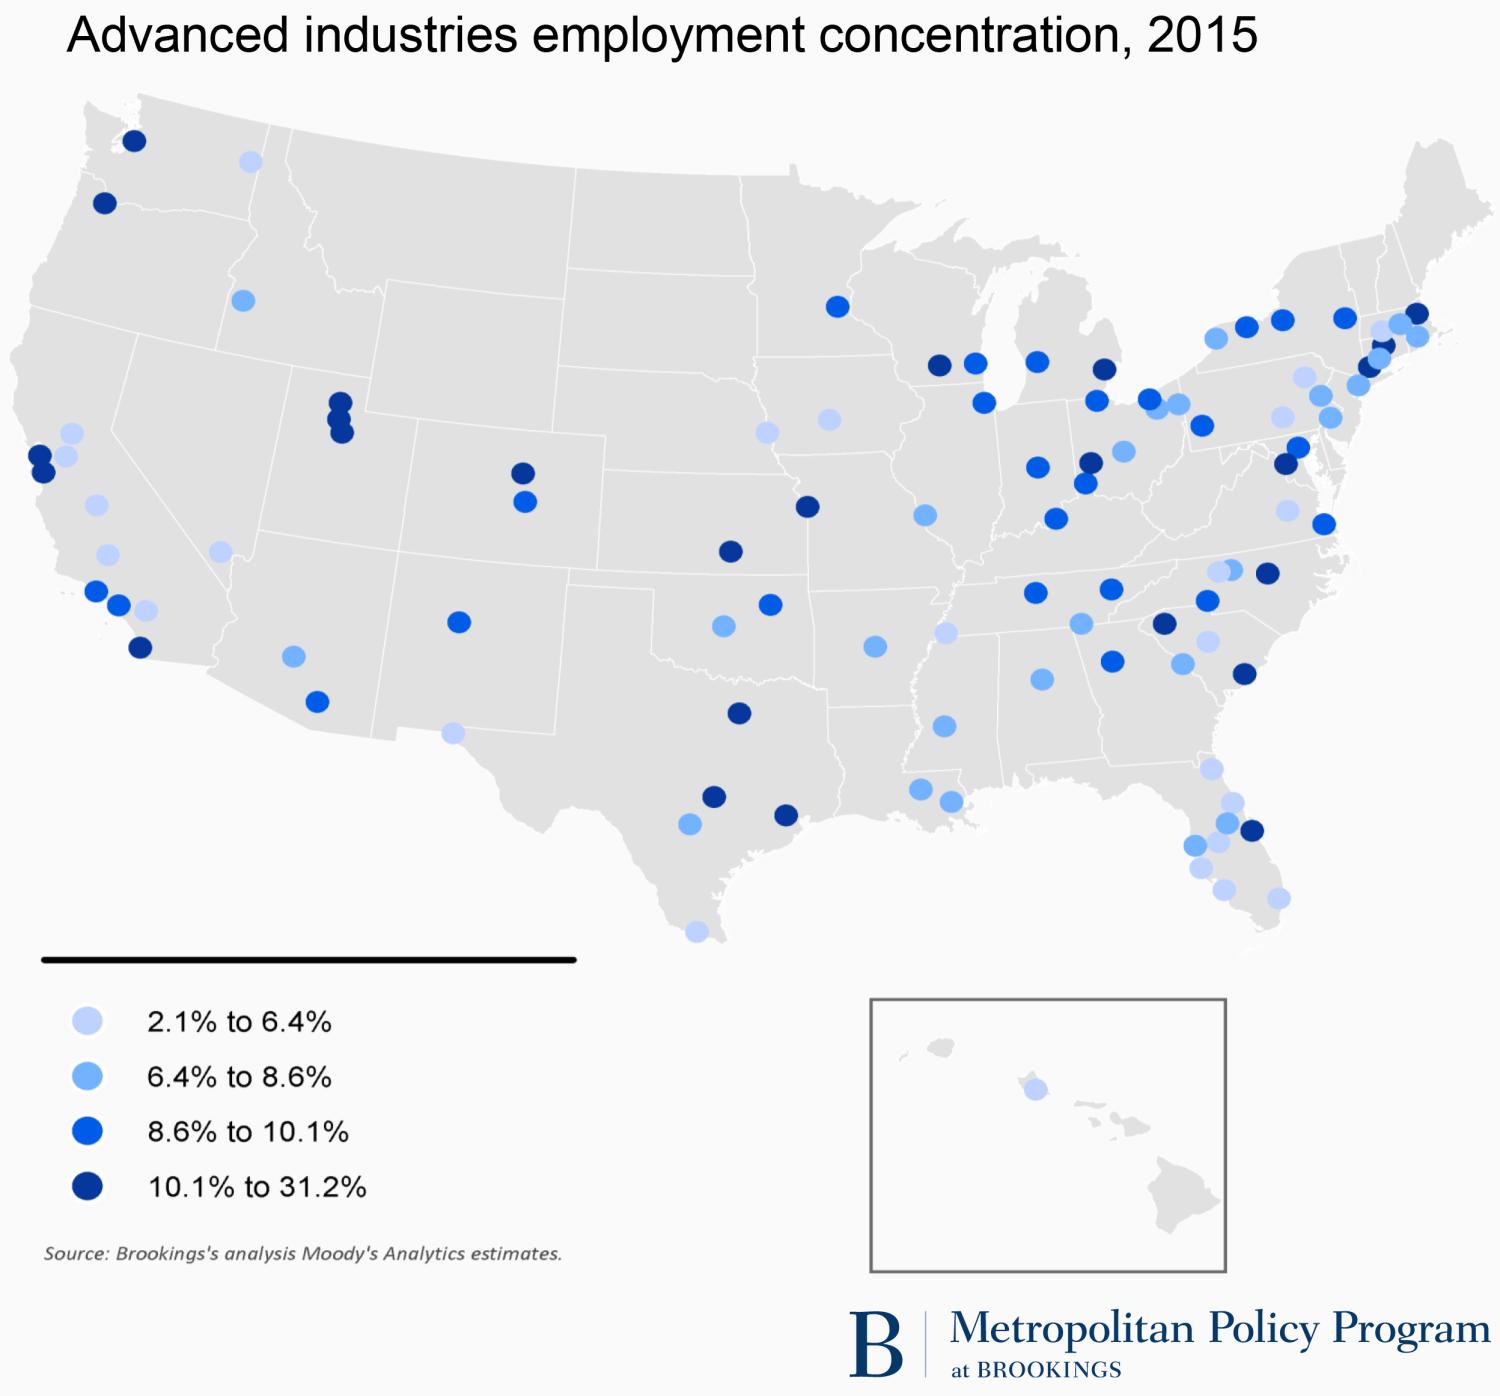 Advanced industries employment concentration, 2015